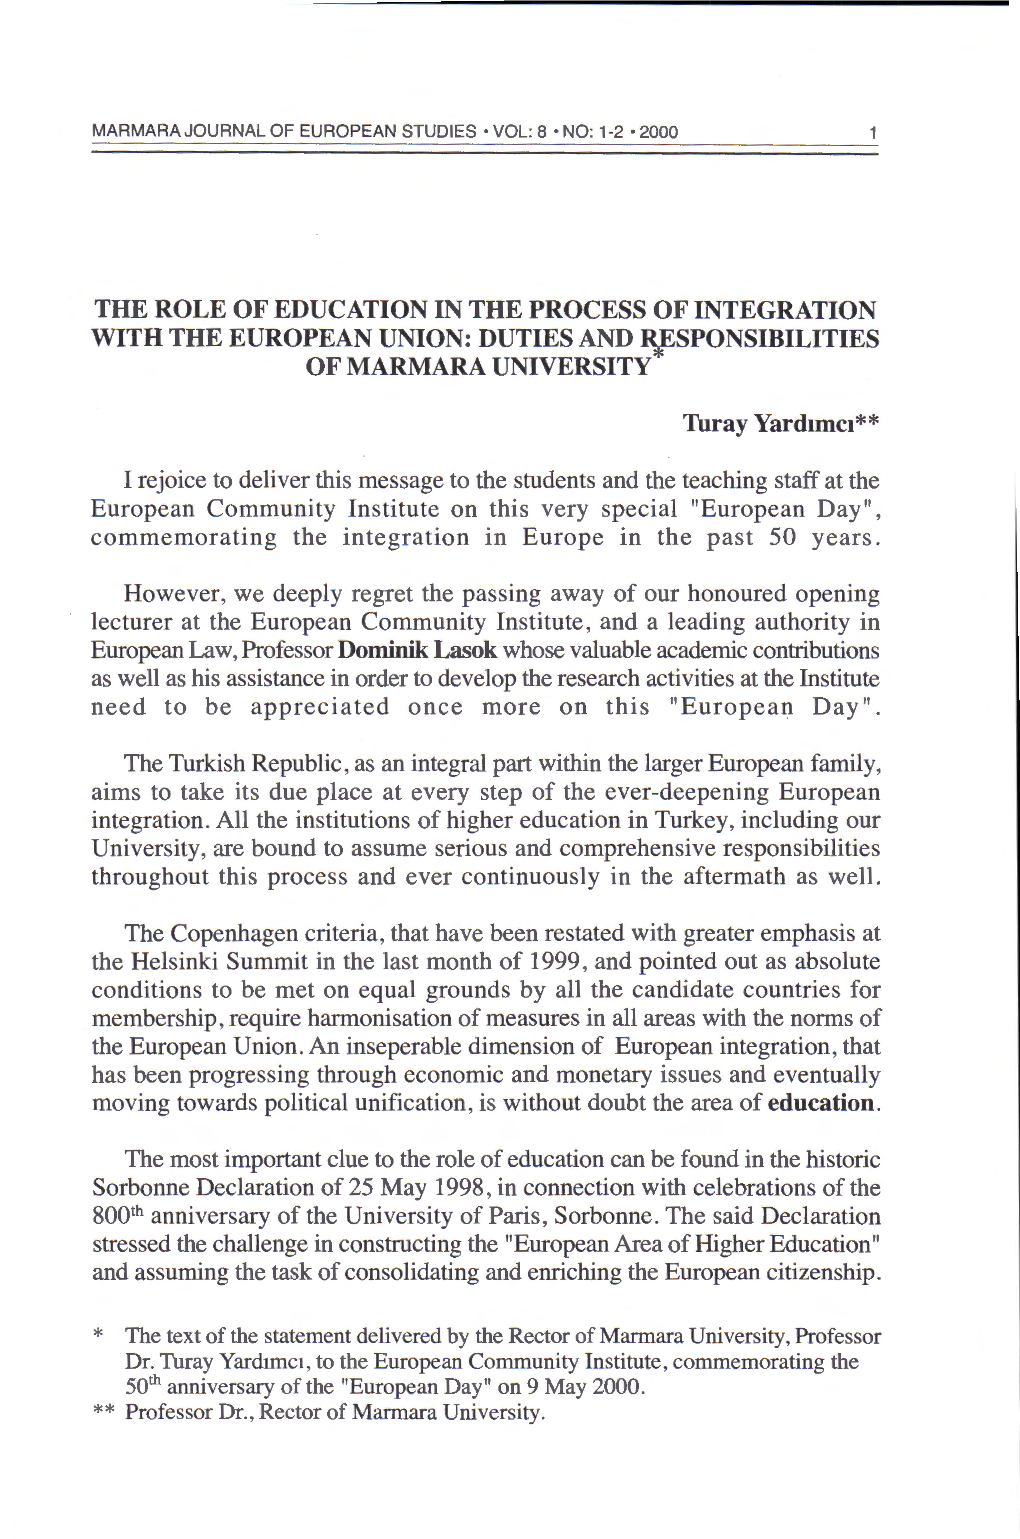 The Role of Education in the Process of Integration with the European Union: Duties and ~Sponsibilities of Marmara University